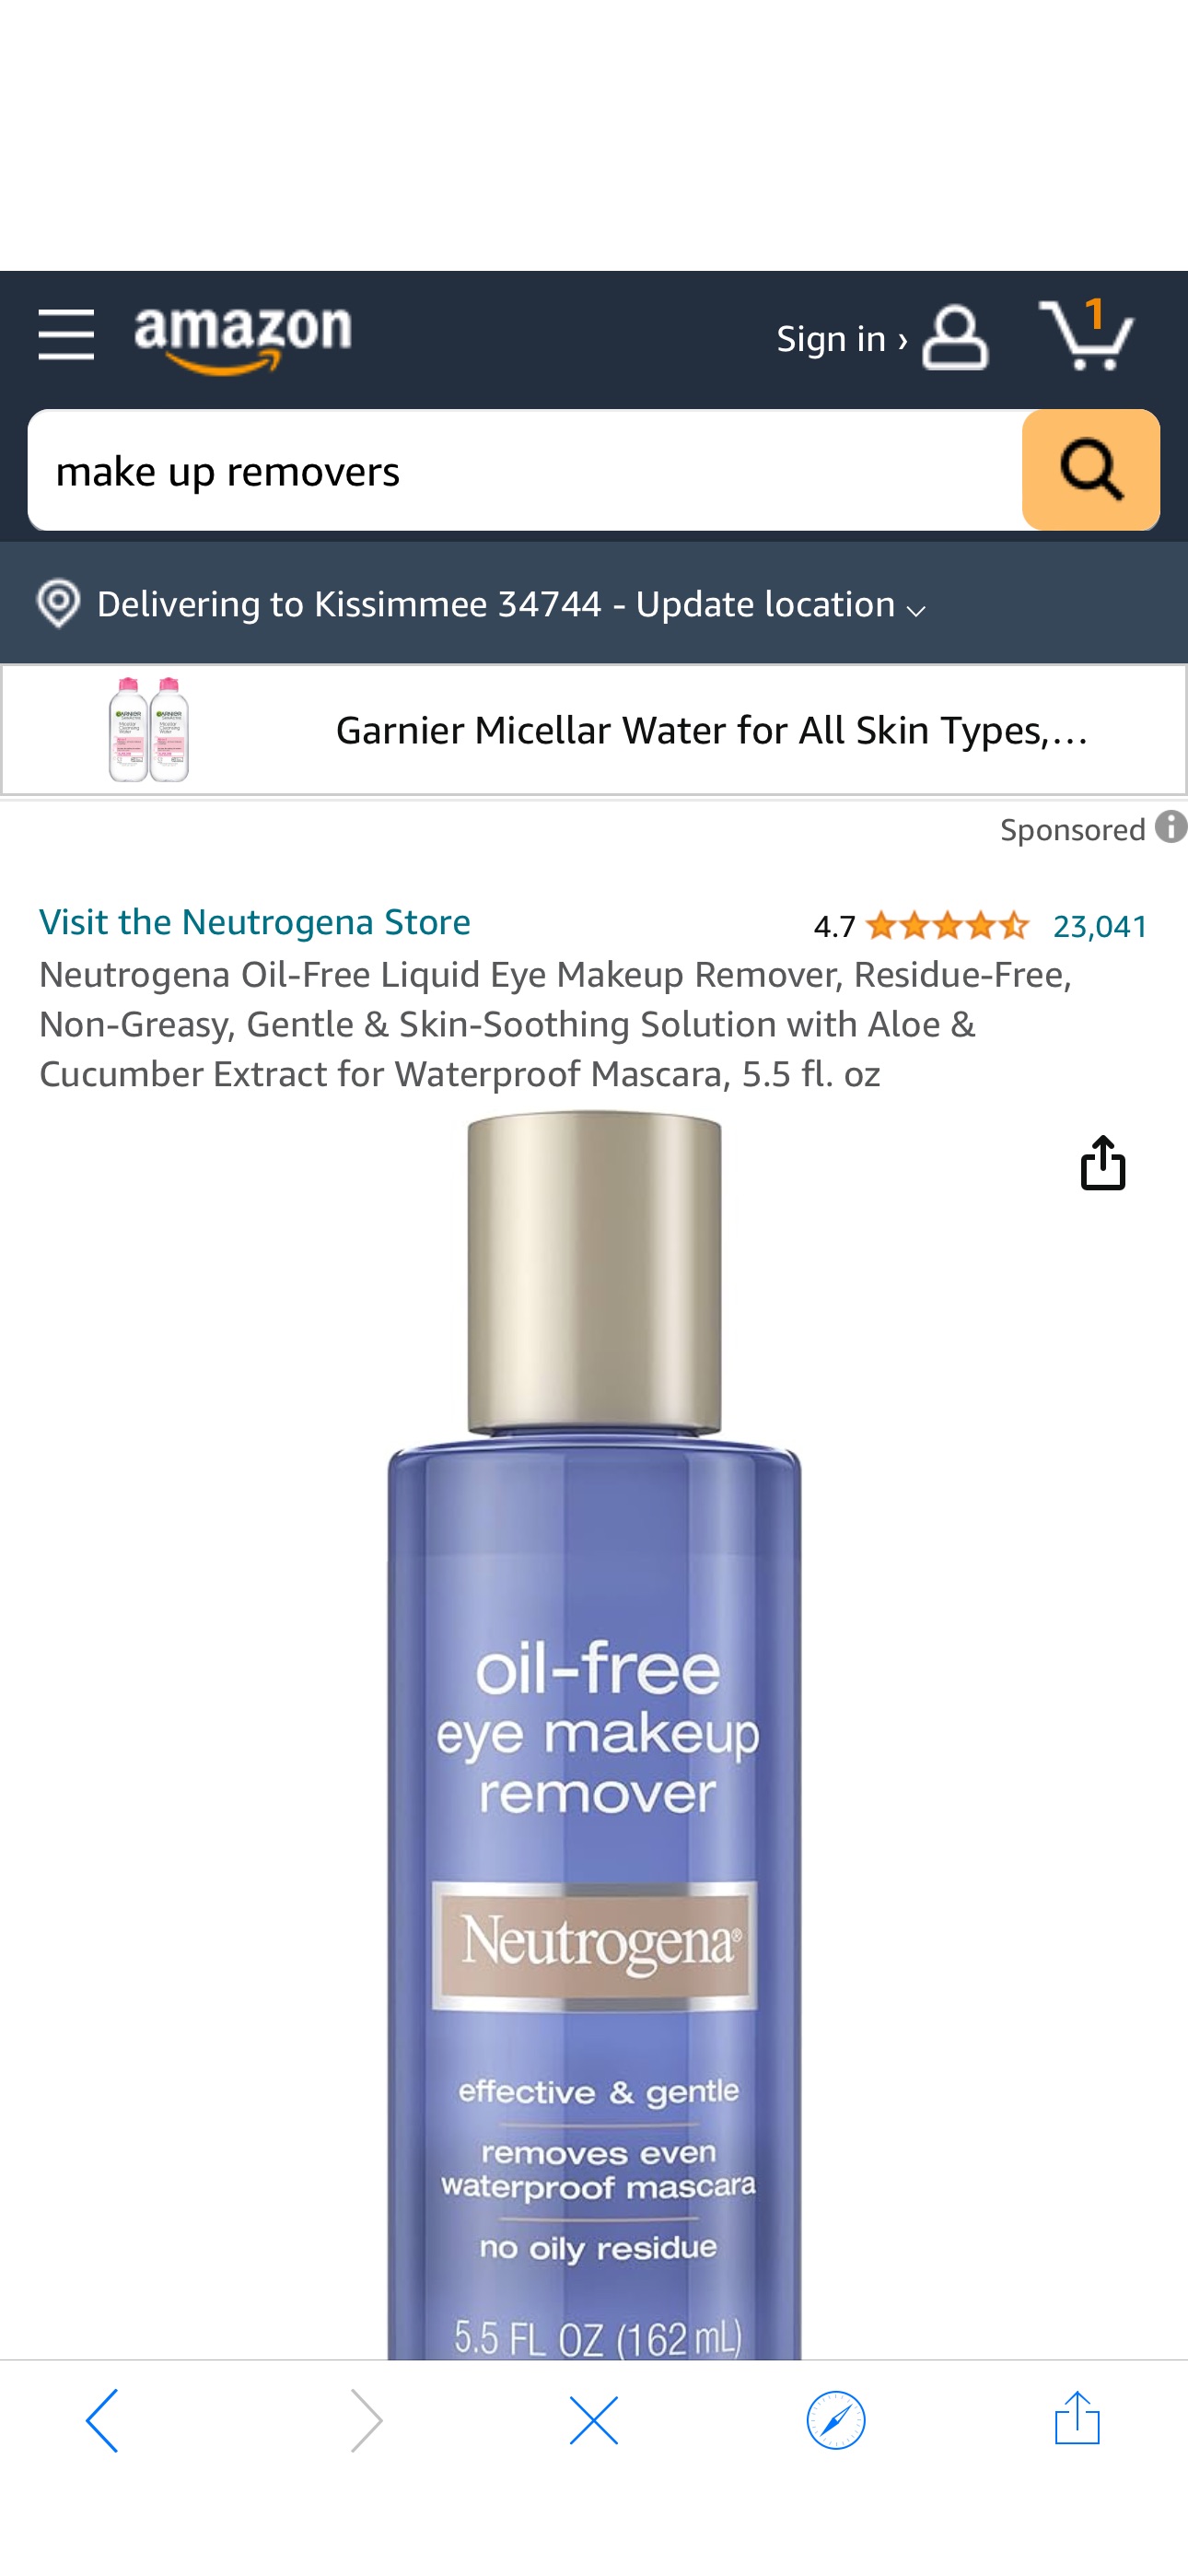 Amazon.com: Neutrogena Oil-Free Liquid Eye Makeup Remover, Residue-Free, Non-Greasy, Gentle & Skin-Soothing Solution with Aloe & Cucumber Extract for Waterproof Mascara, 5.5 fl. oz : Beauty & Personal